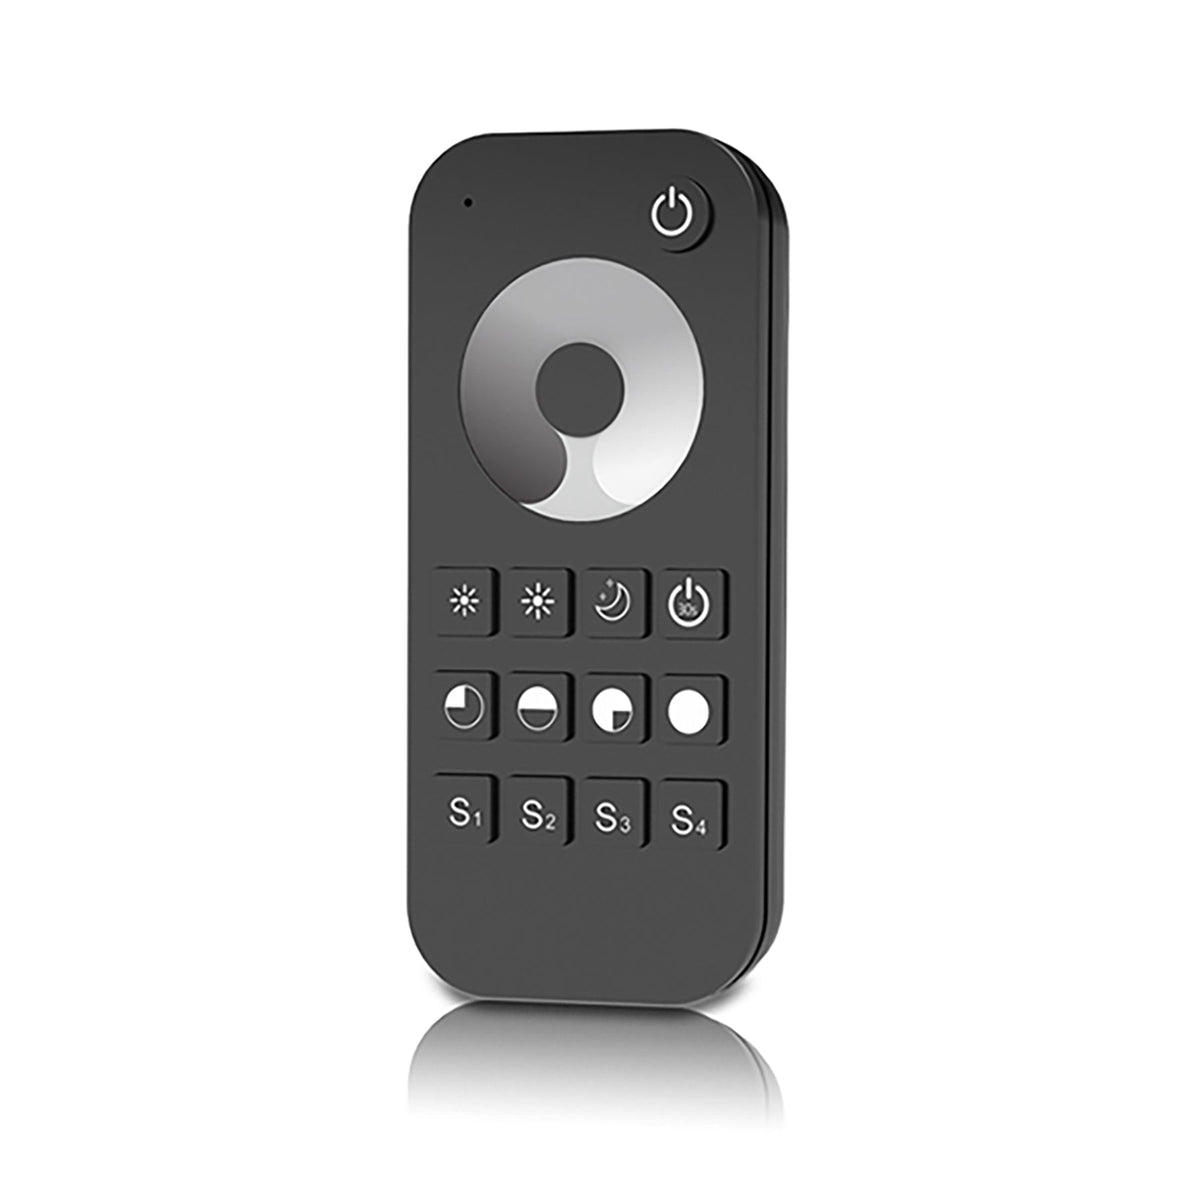 G.W.S. LED 1 Zone Dimming RF Remote Control RT1